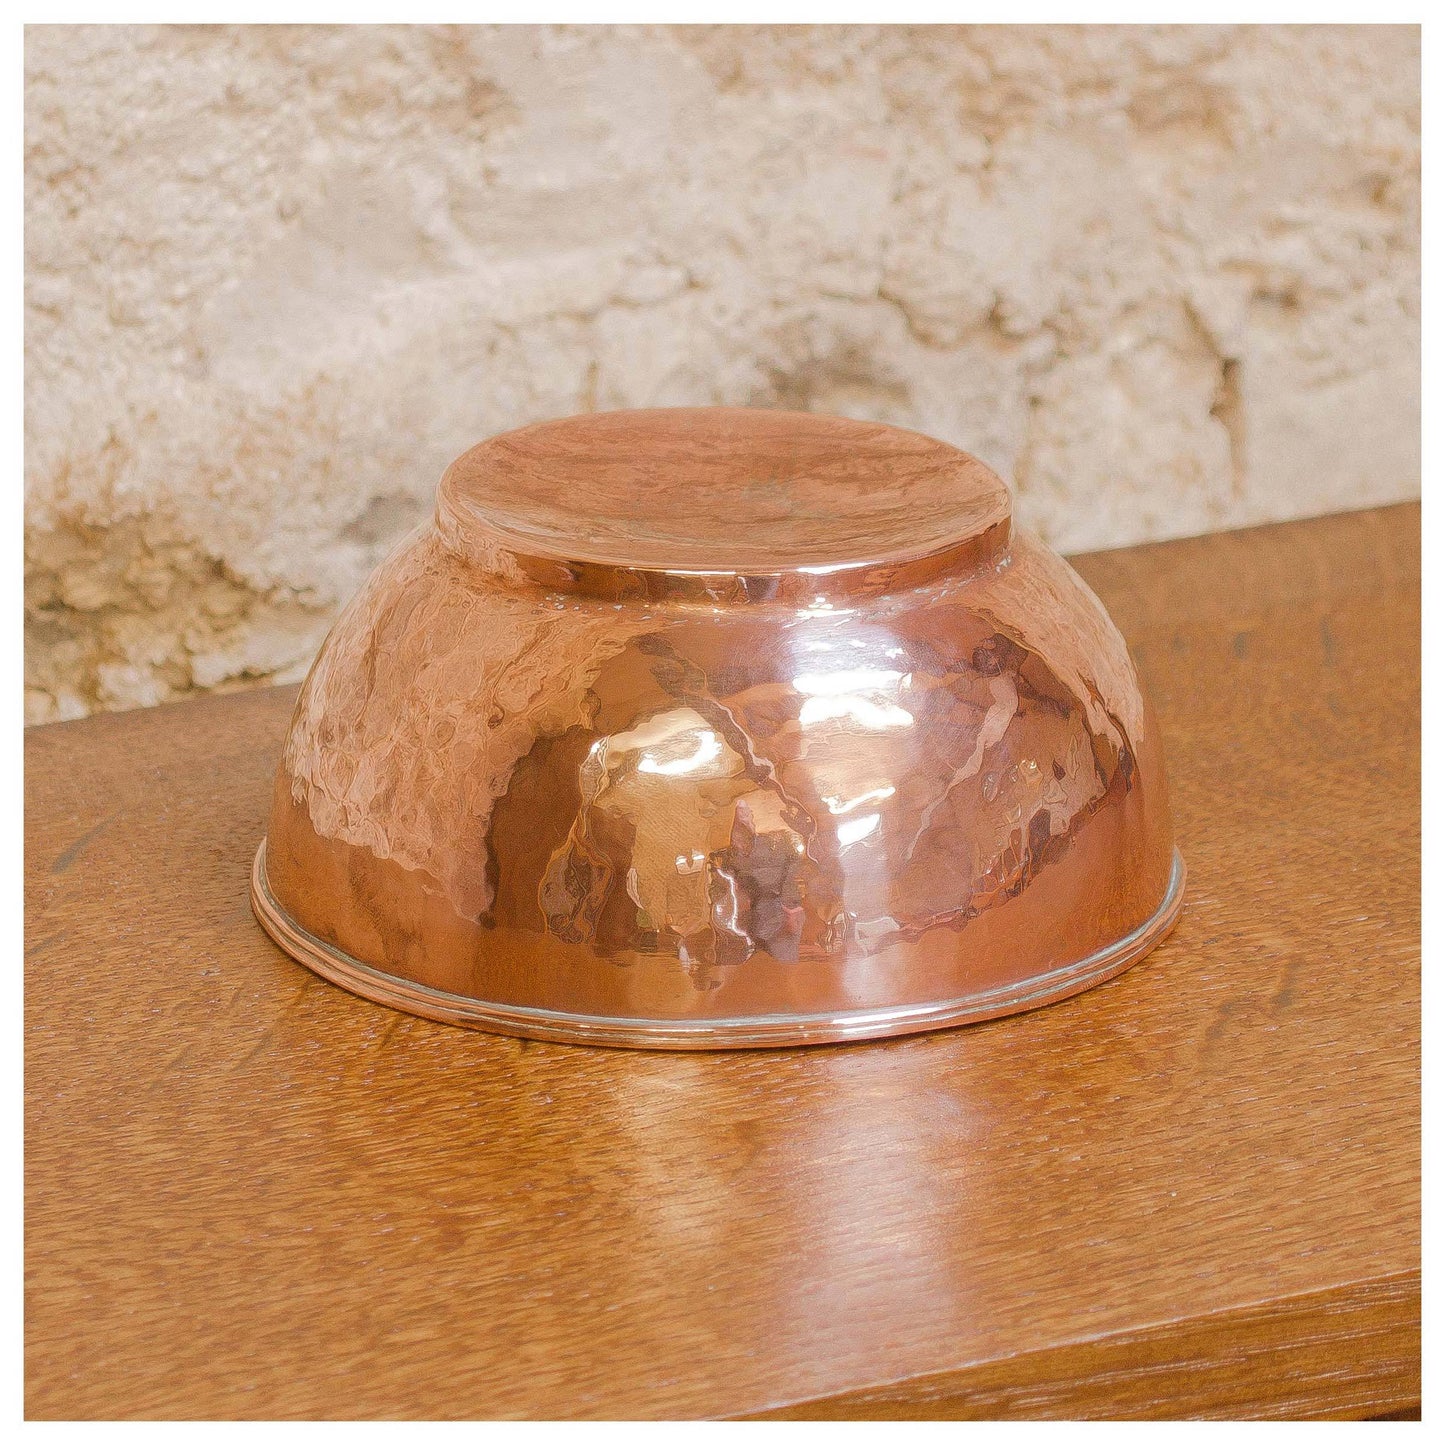 An Arts & Crafts Lakes School hand beaten copper bowl by Fanny Carter